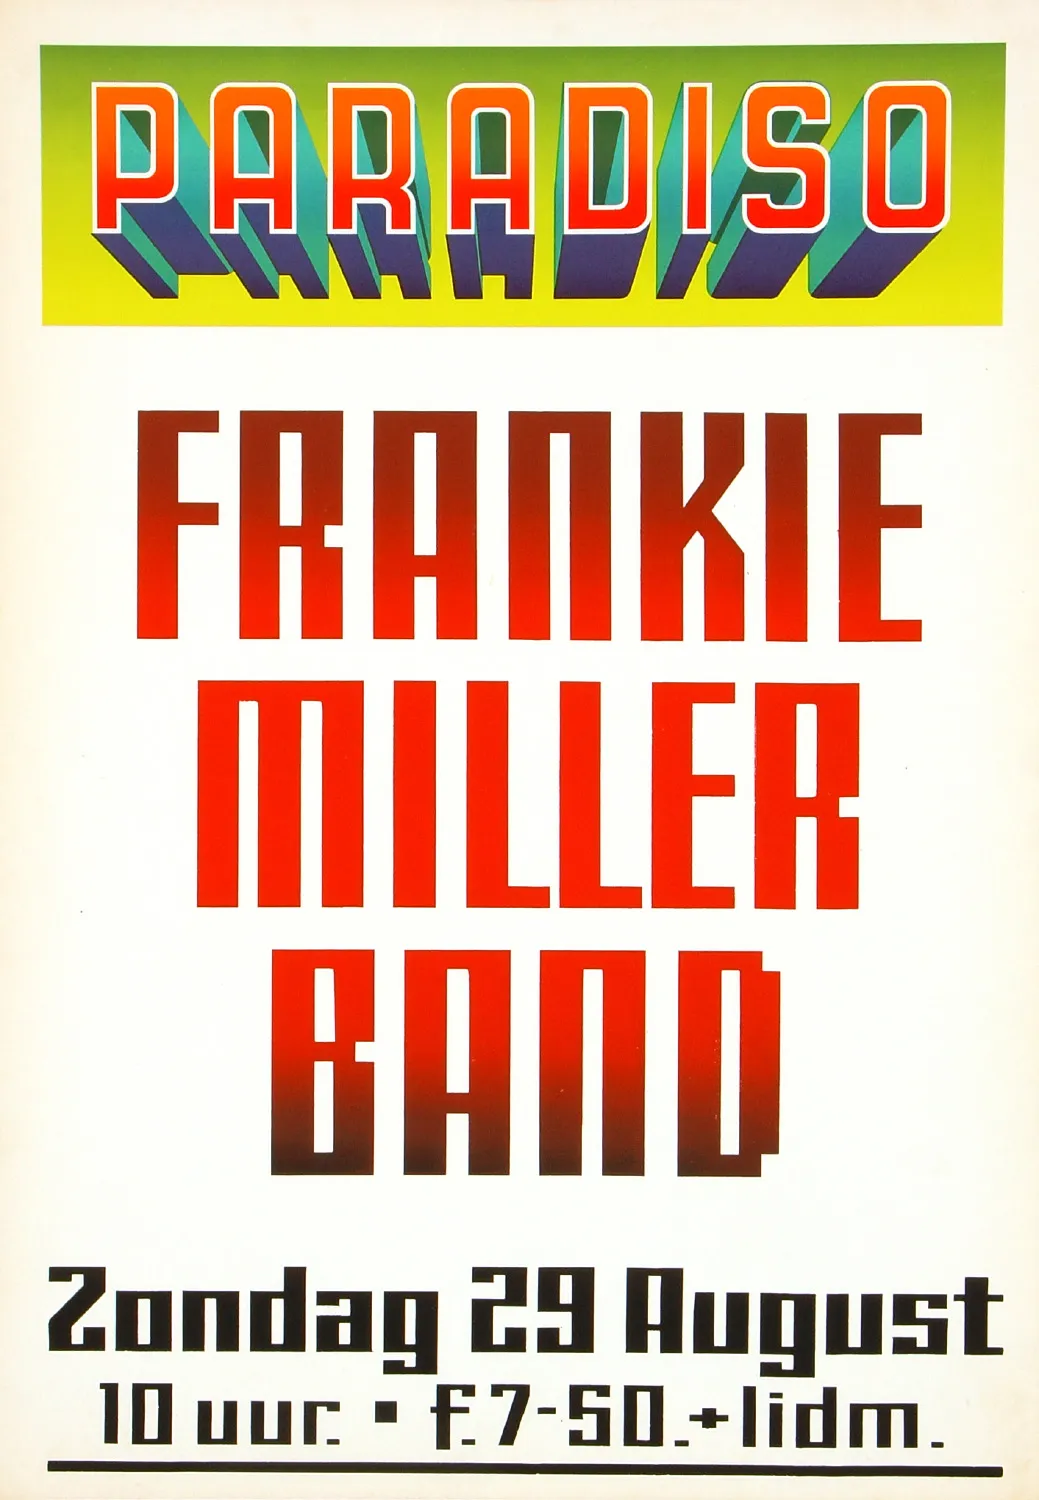 Featured image for “Frankie Miller Band”